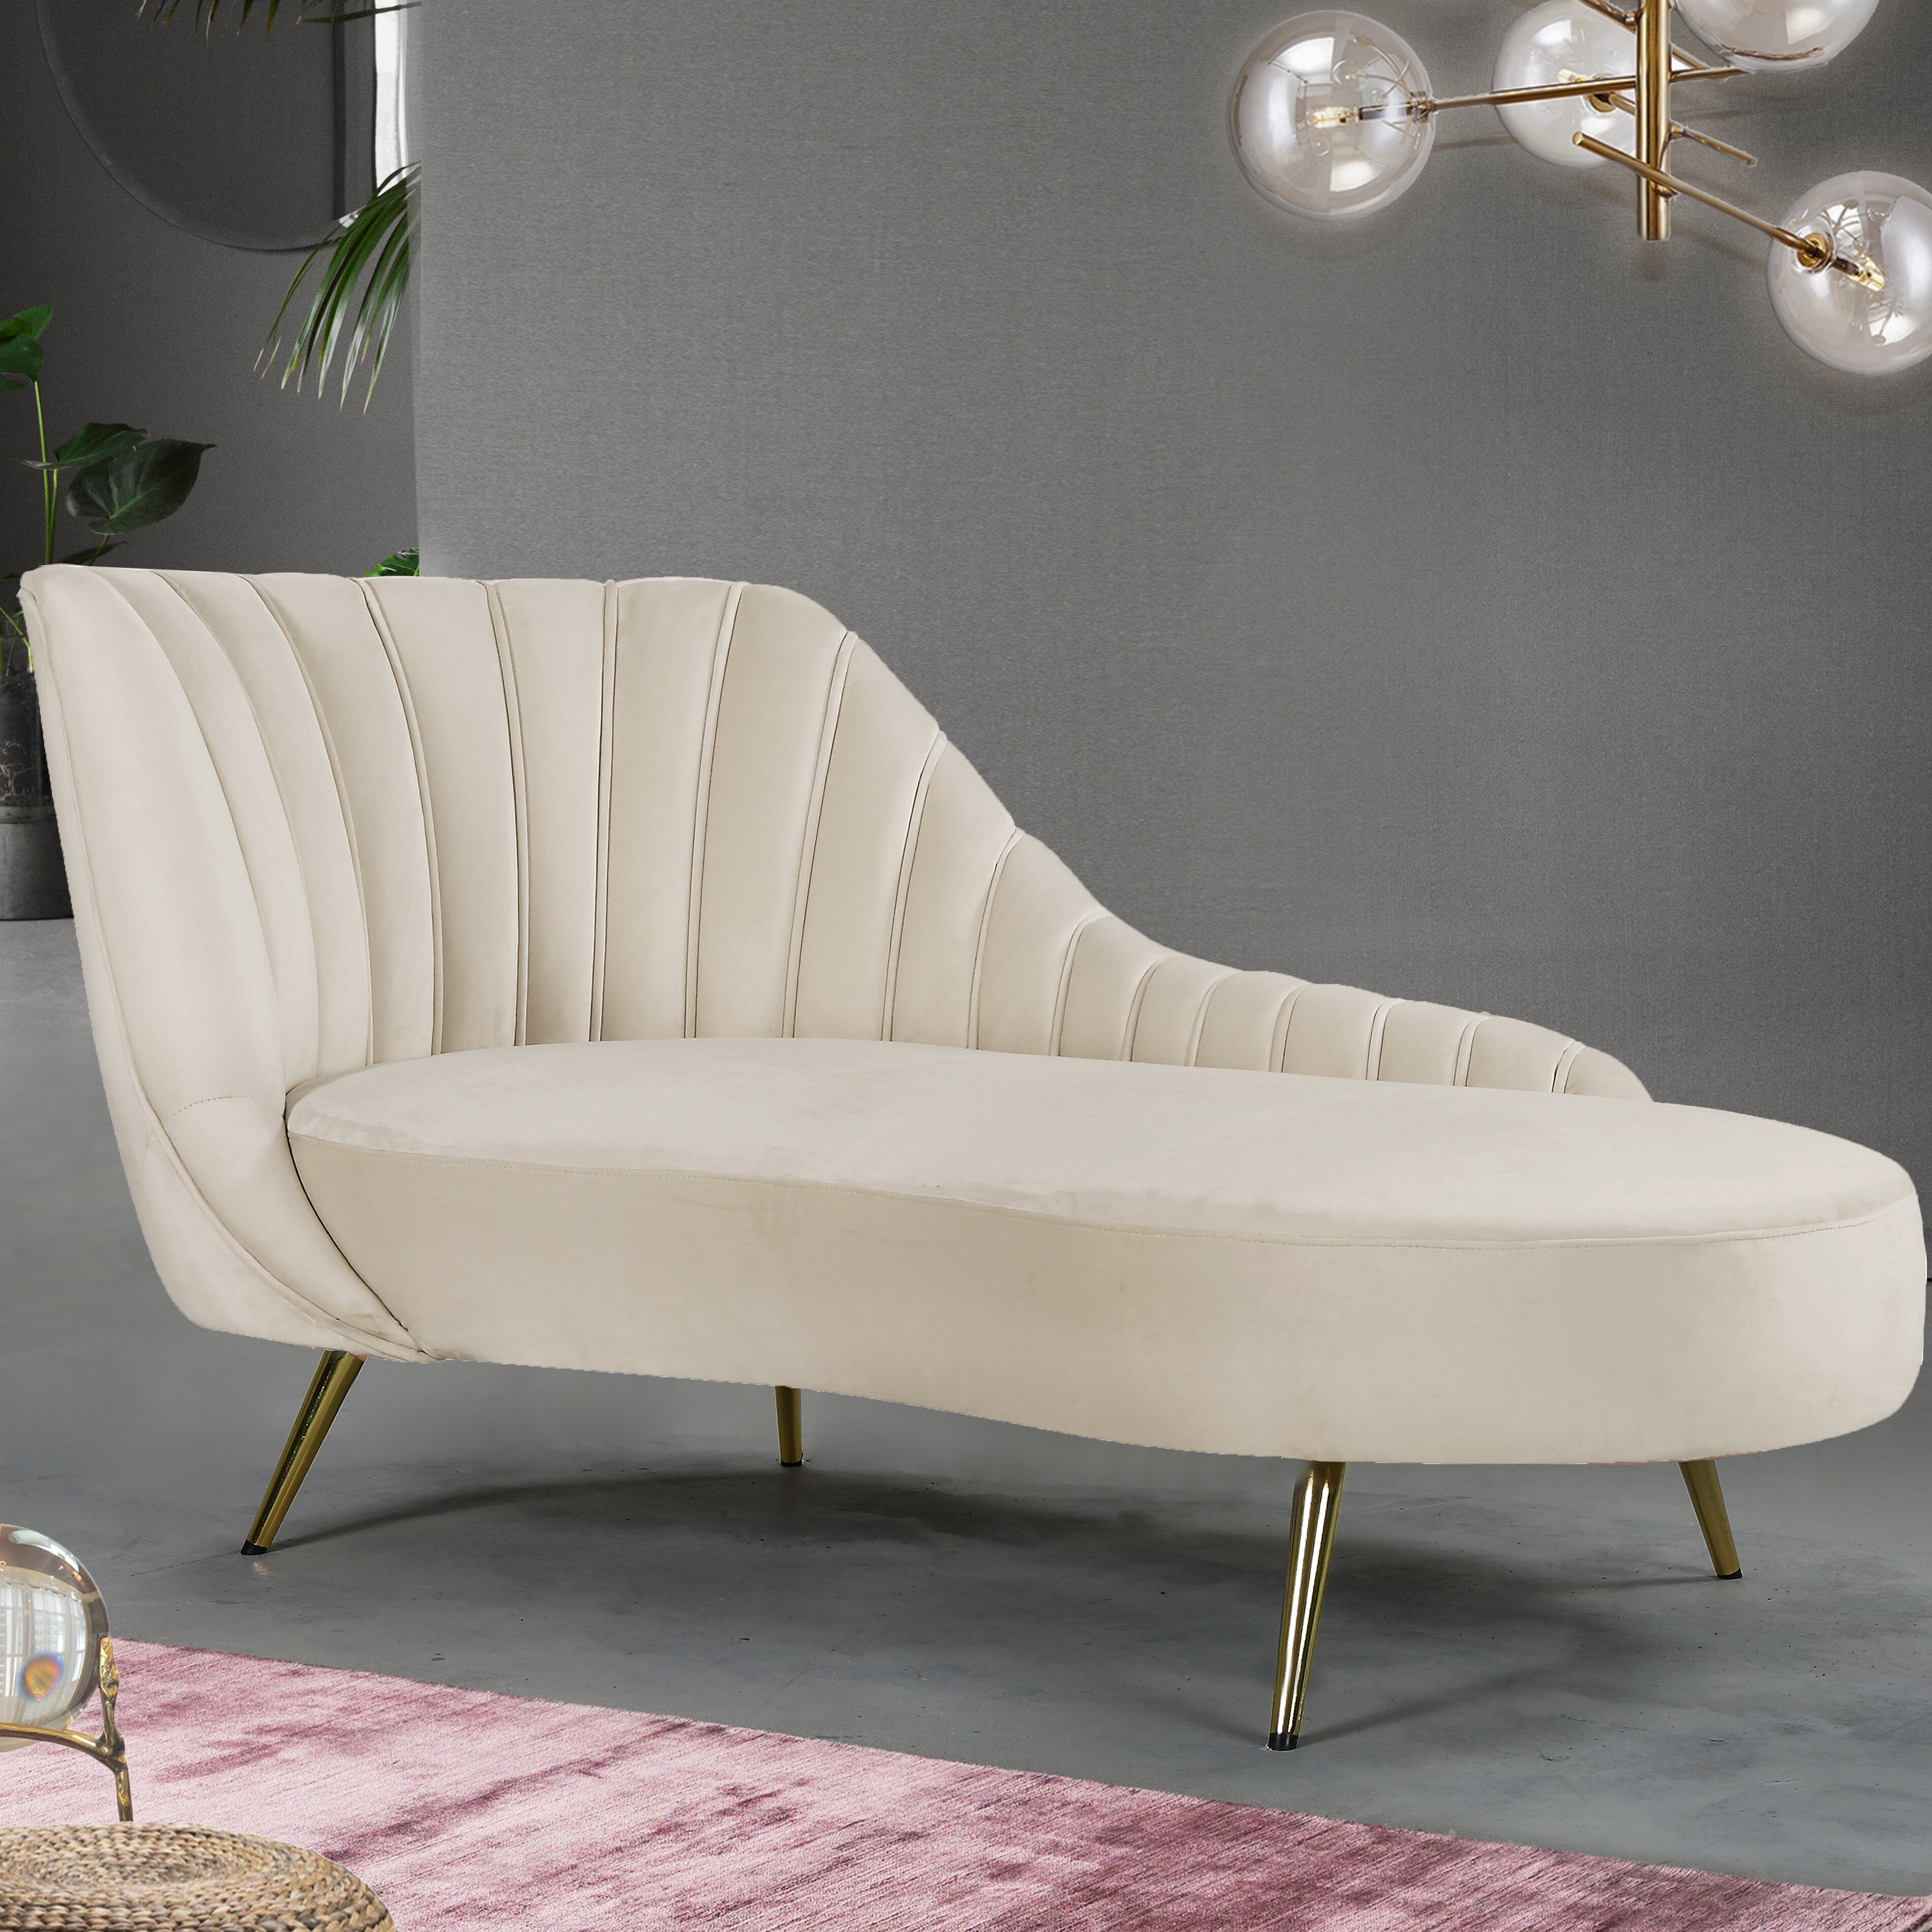 Tiberius Upholstered Chaise Lounge